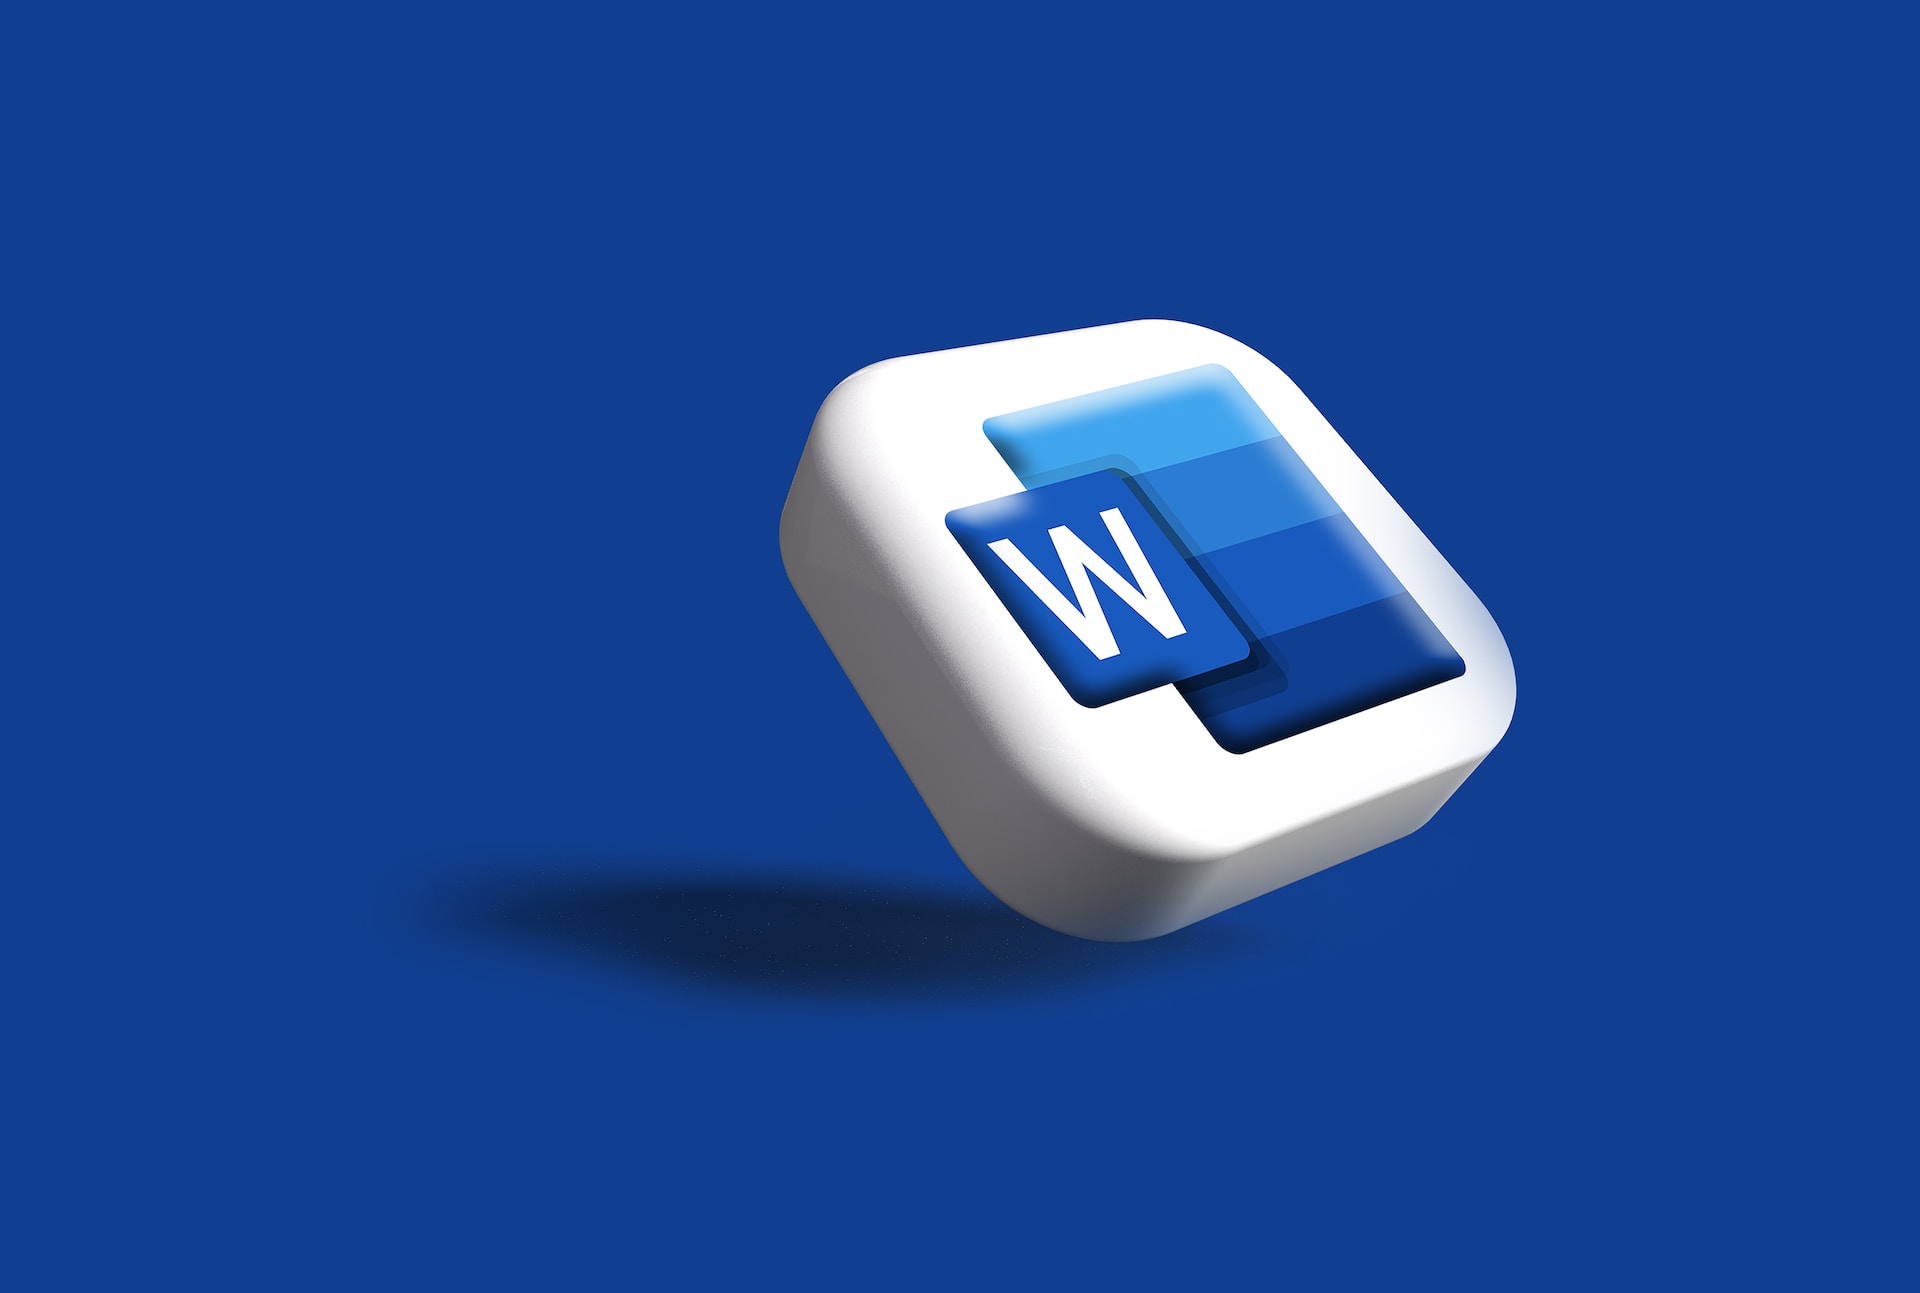 create-edit-and-view-microsoft-word-documents-for-free